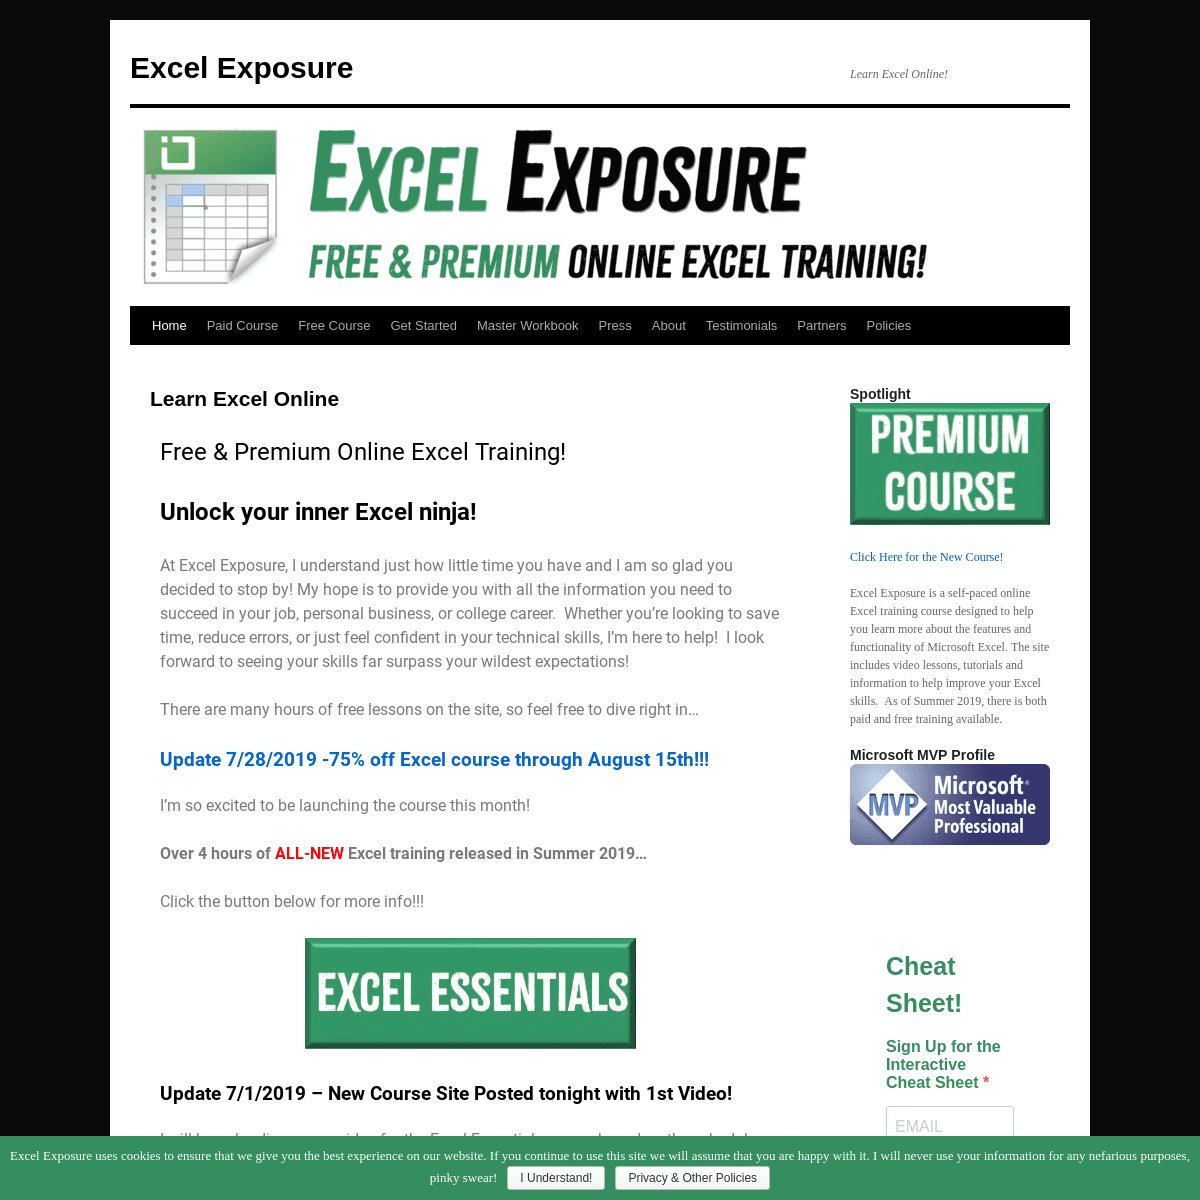 A complete backup of excelexposure.com